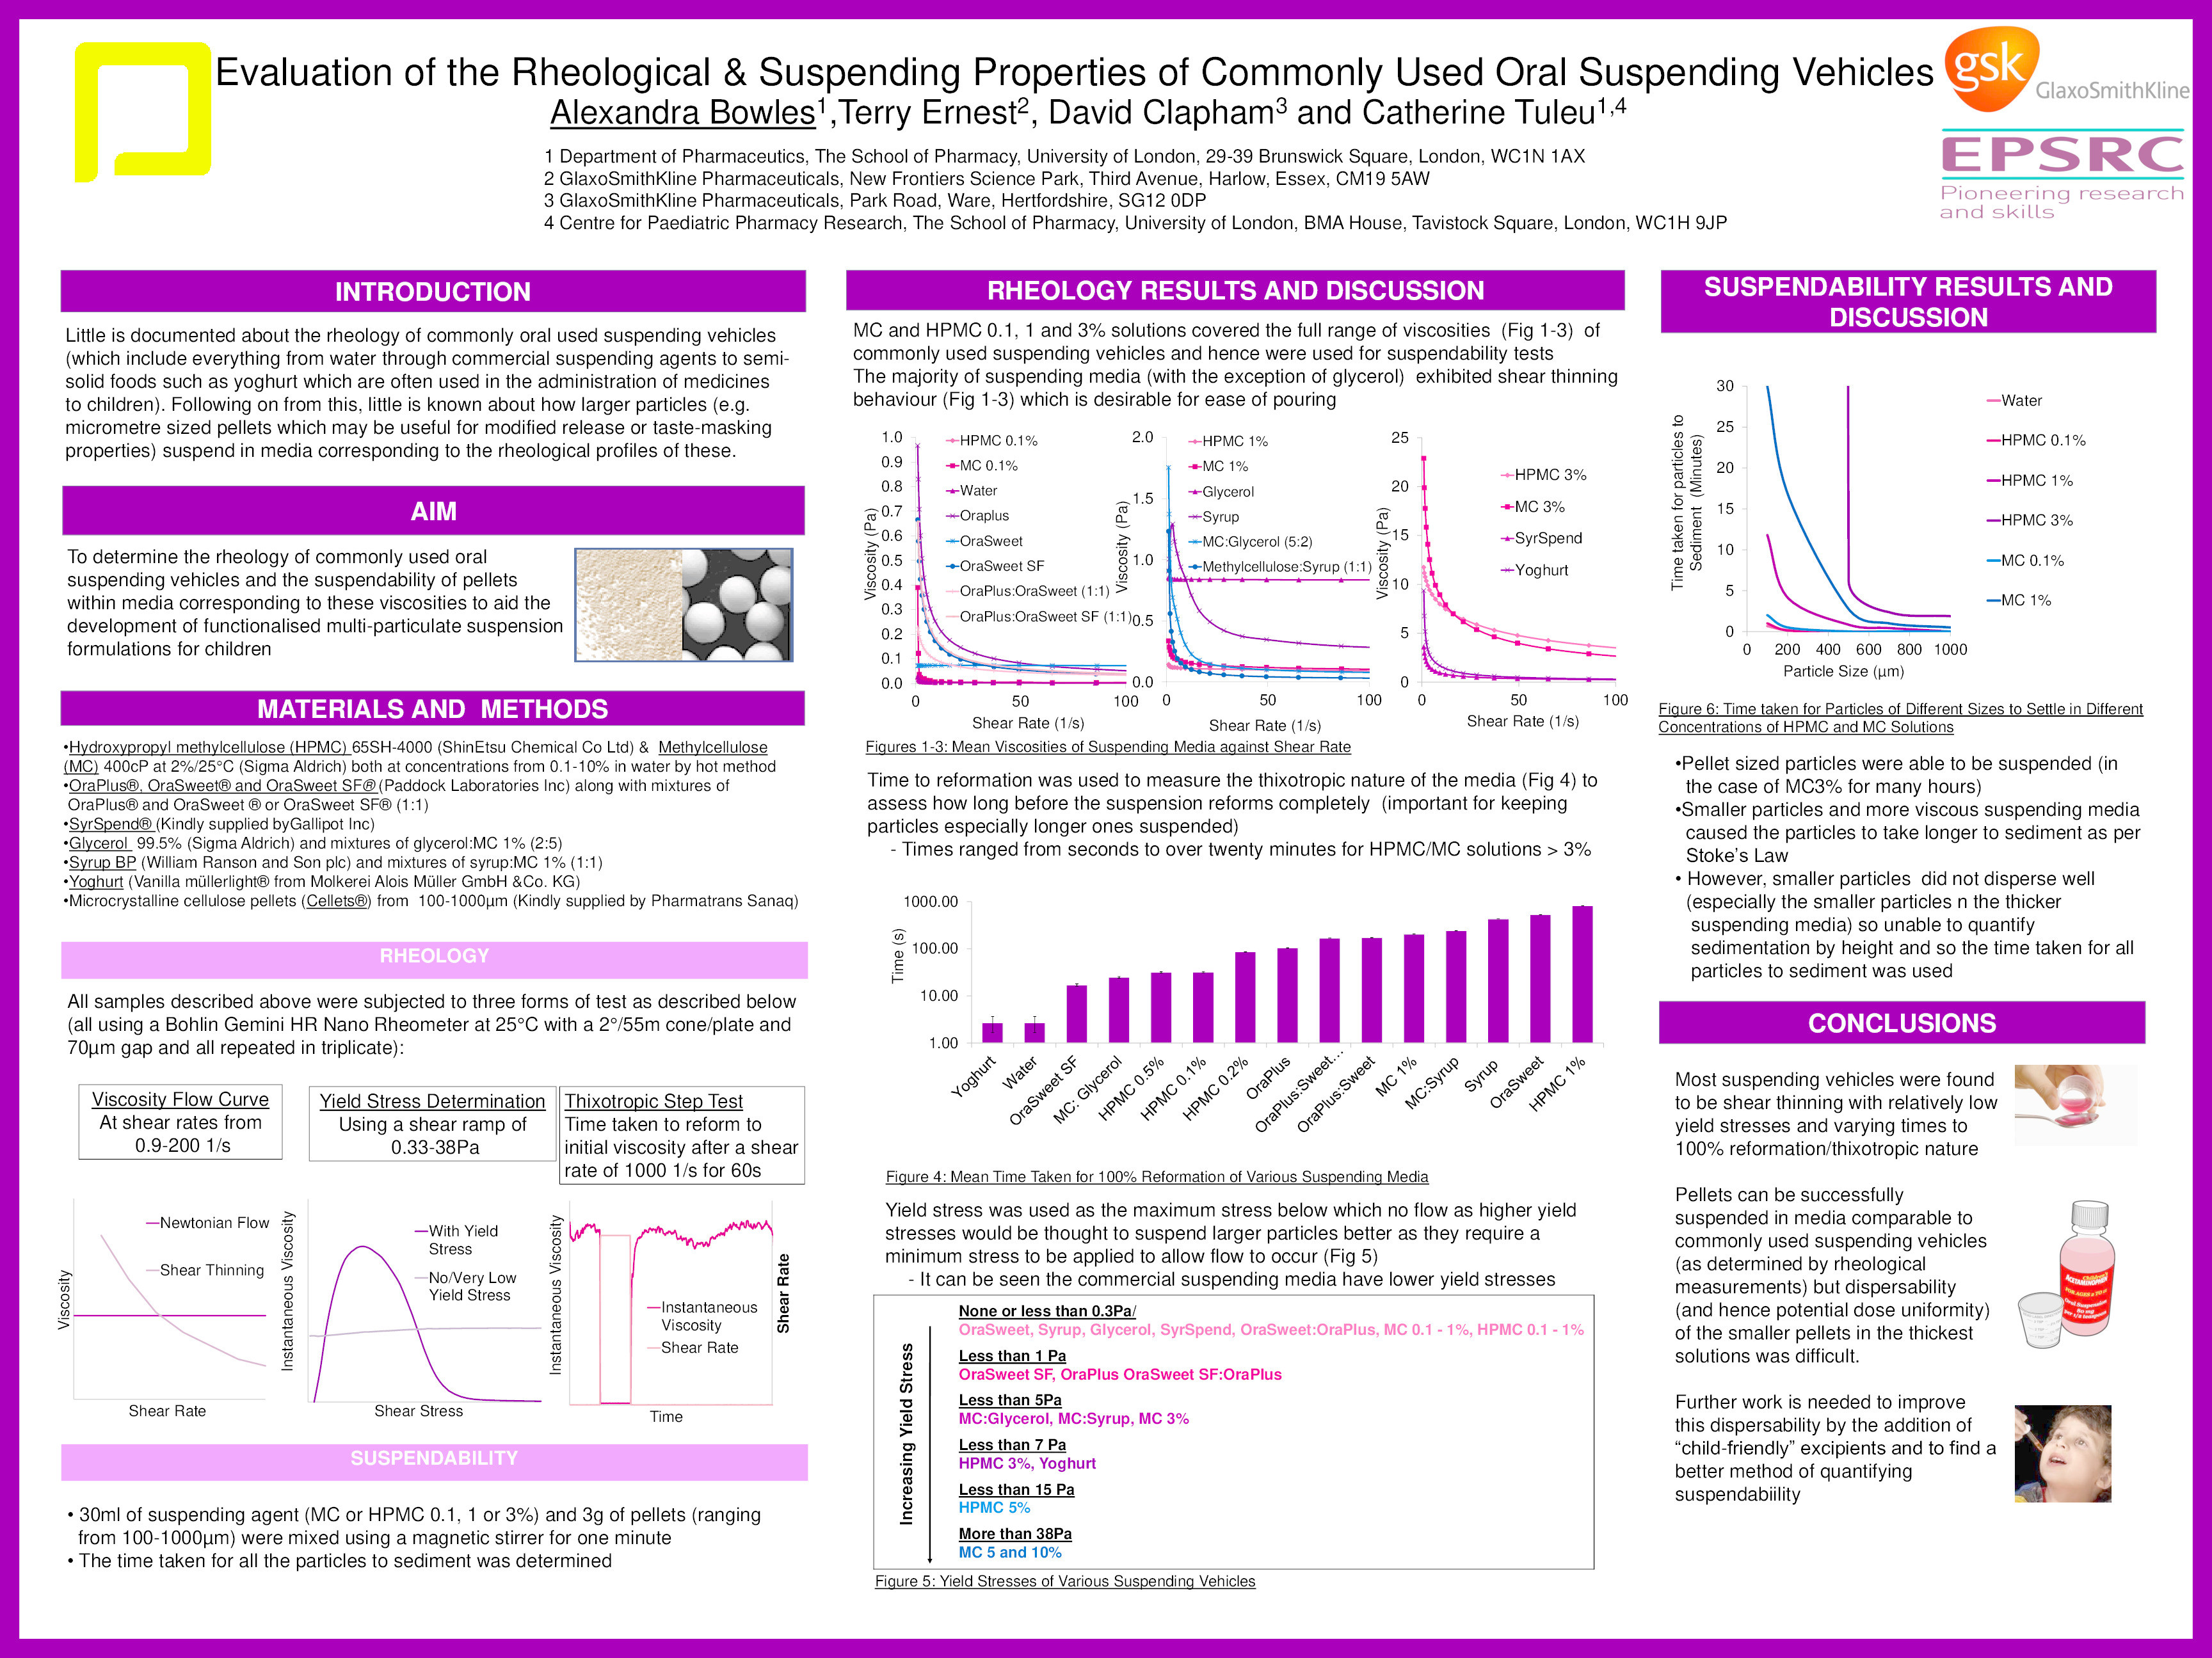 Evaluation of the rheological and suspending properties of commonly used oral suspending vehicles Thumbnail